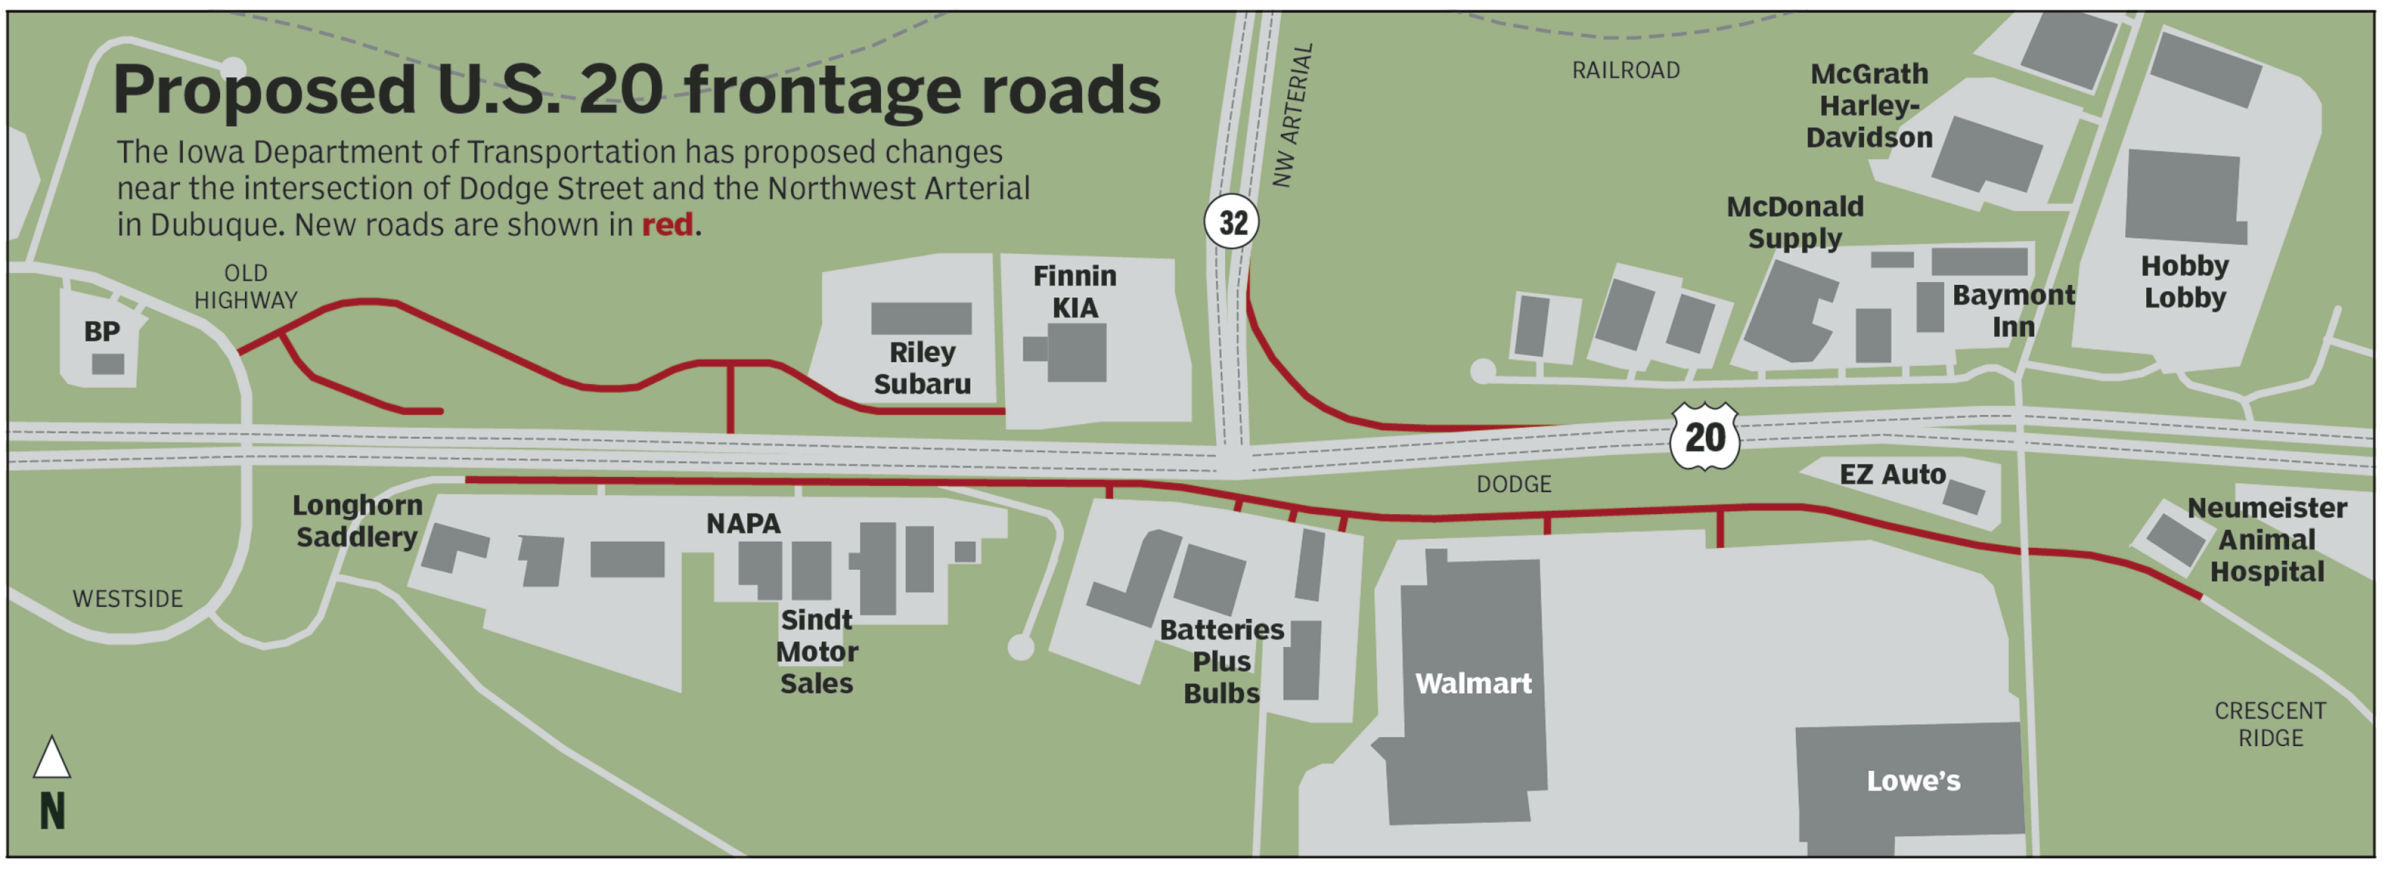 The Iowa Department of Transportation has proposed changes near the intersection of Dodge Street and the Northwest Arterial in Dubuque. New roads are shown in red.    PHOTO CREDIT: Telegraph Herald